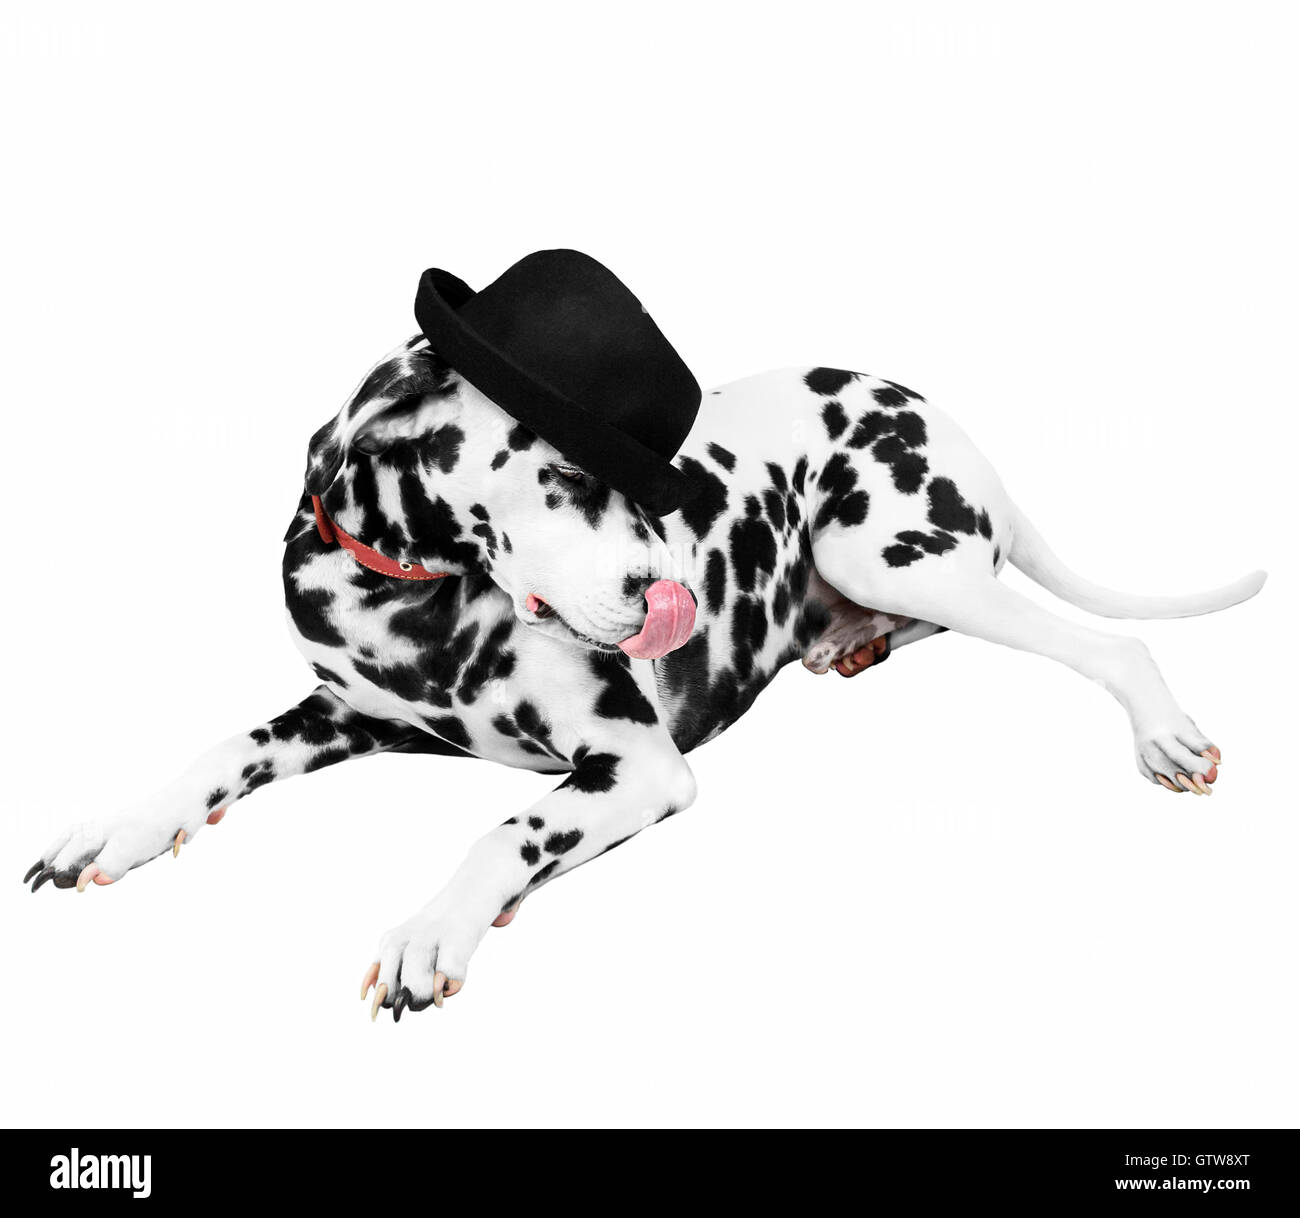 Dalmatian dog in a black hat pulled down over his eyes is looking away and licked Stock Photo